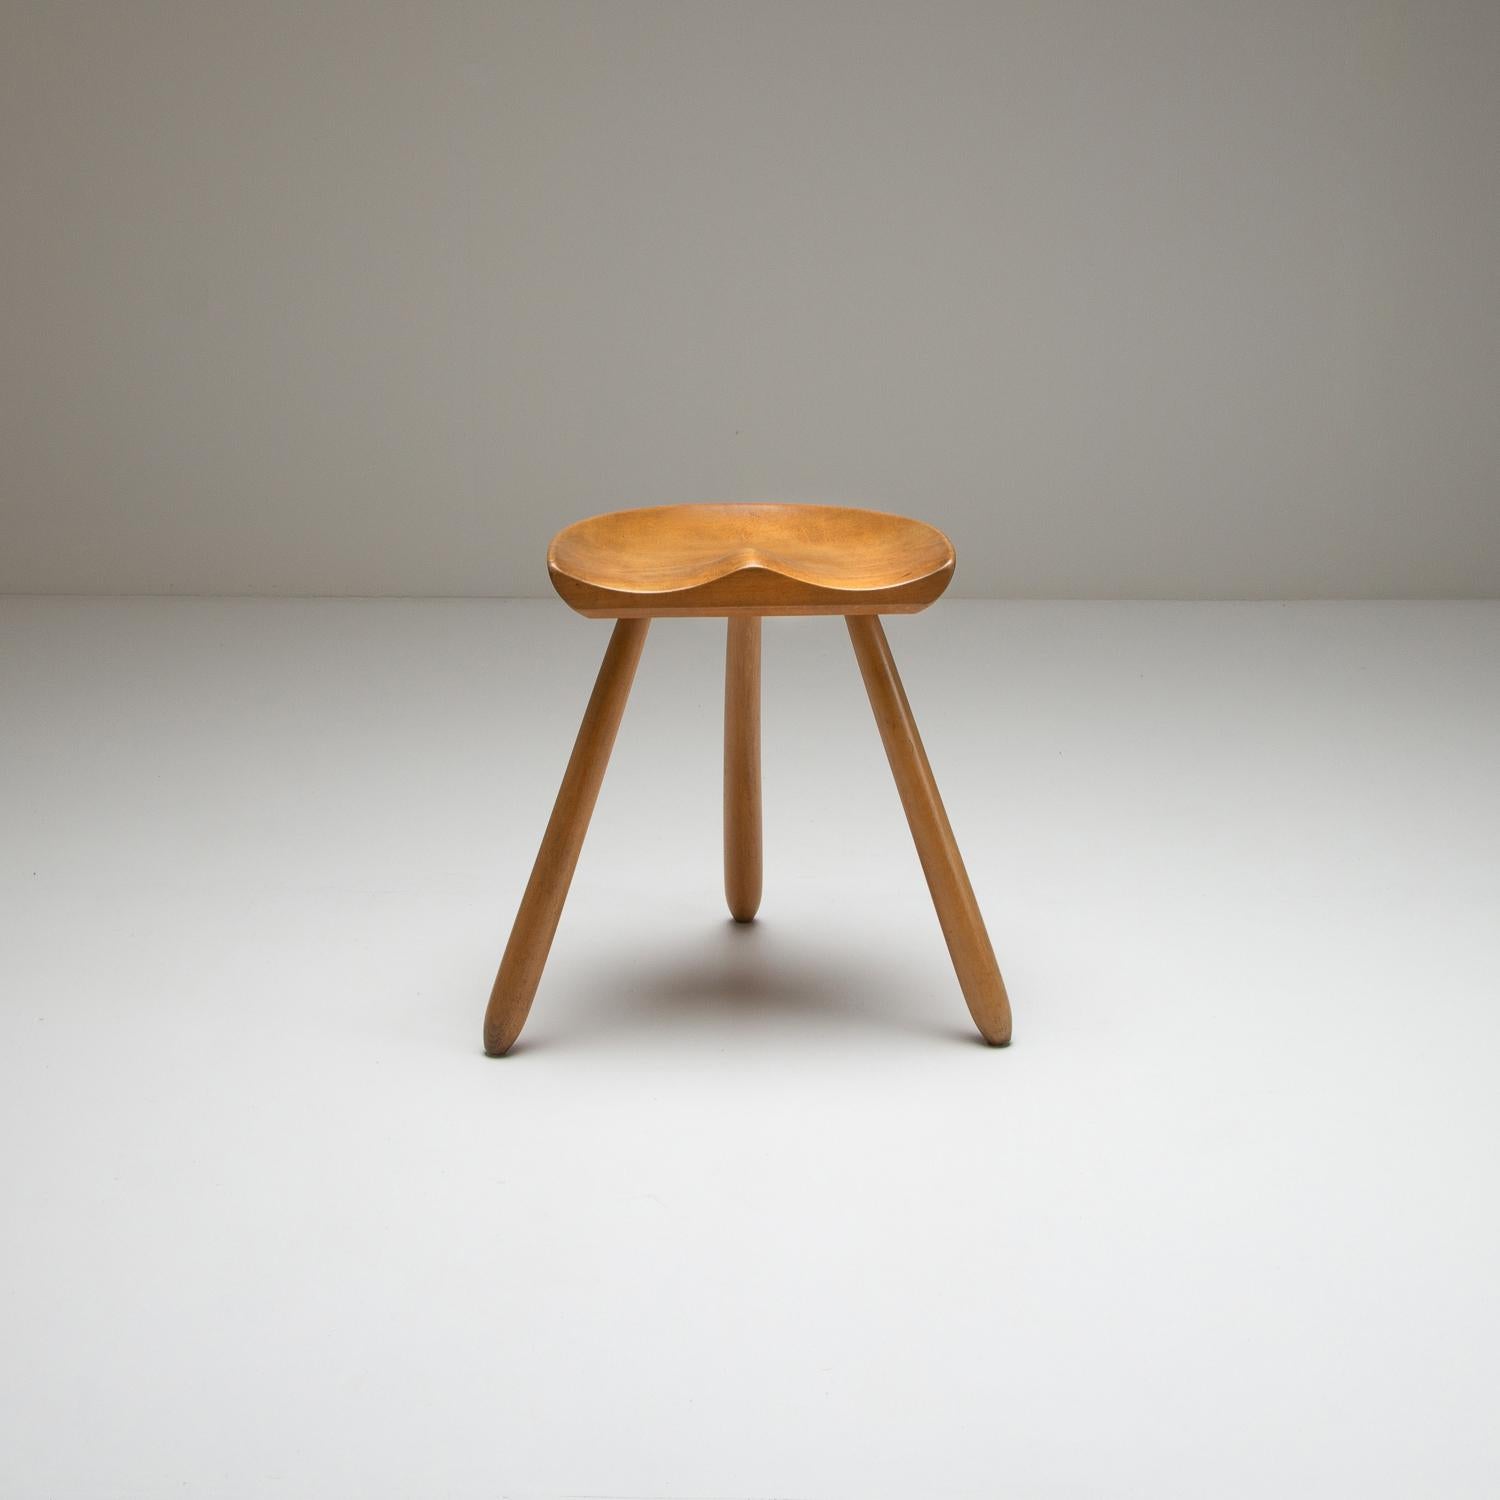 The iconic Danish tripod milking stool in solid beech, 1950s. Sensitively restored. Beautiful patina. Rock solid.